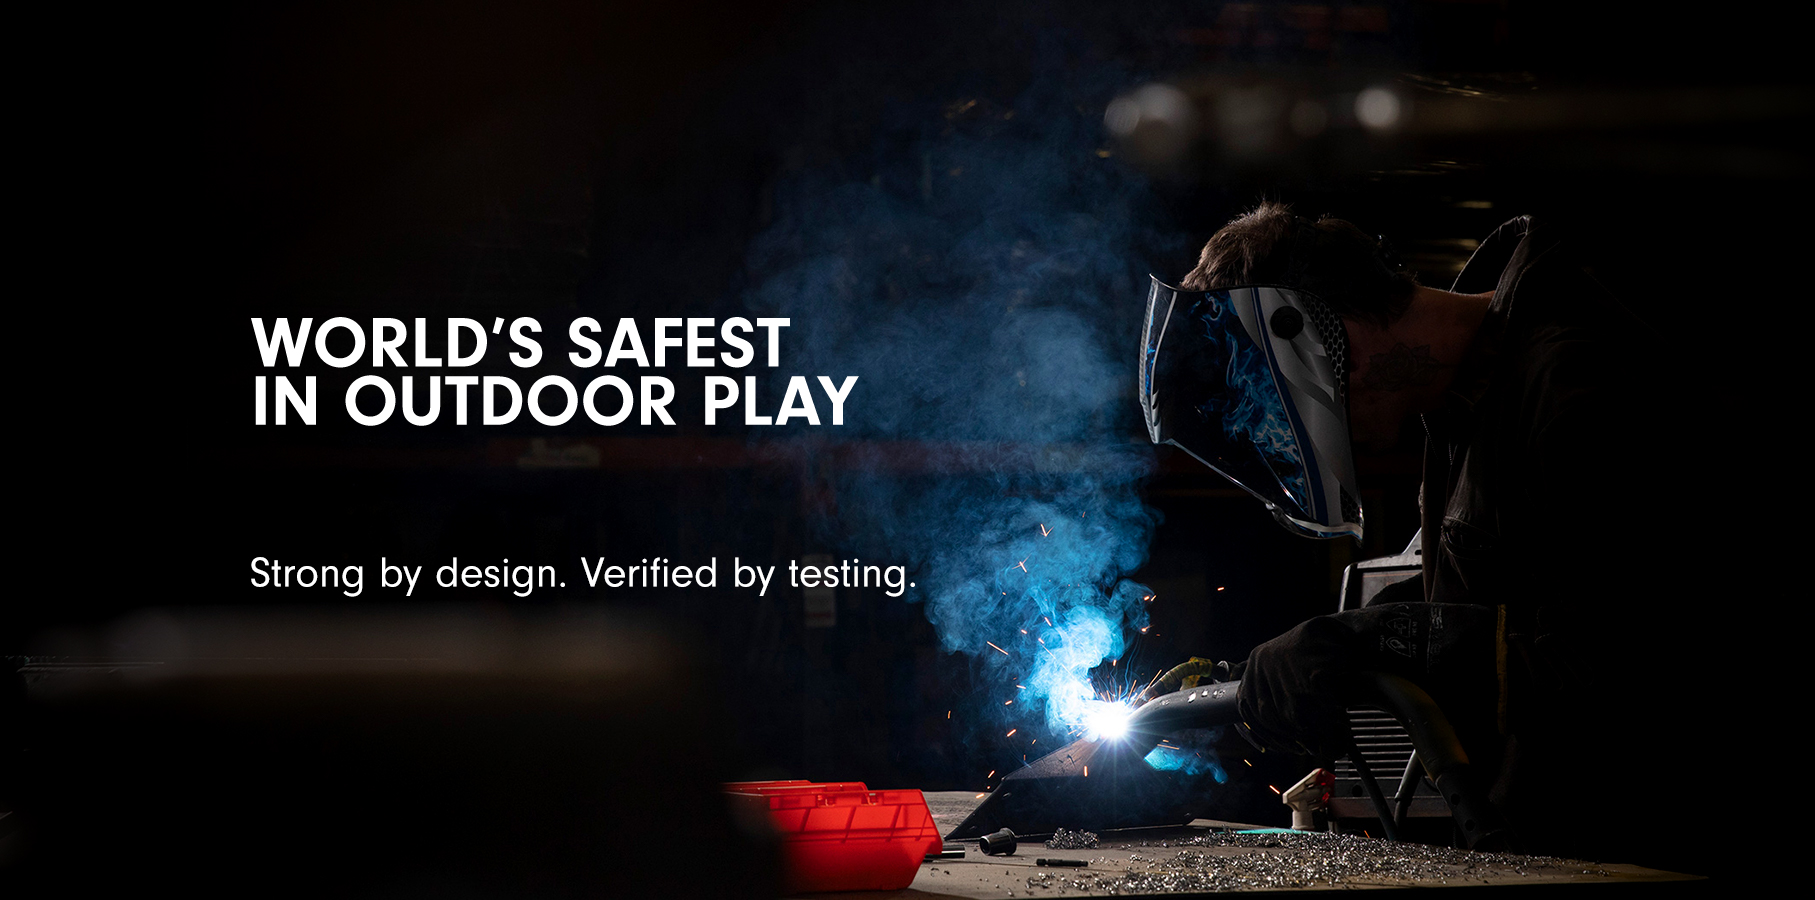 World's safest in outdoor play